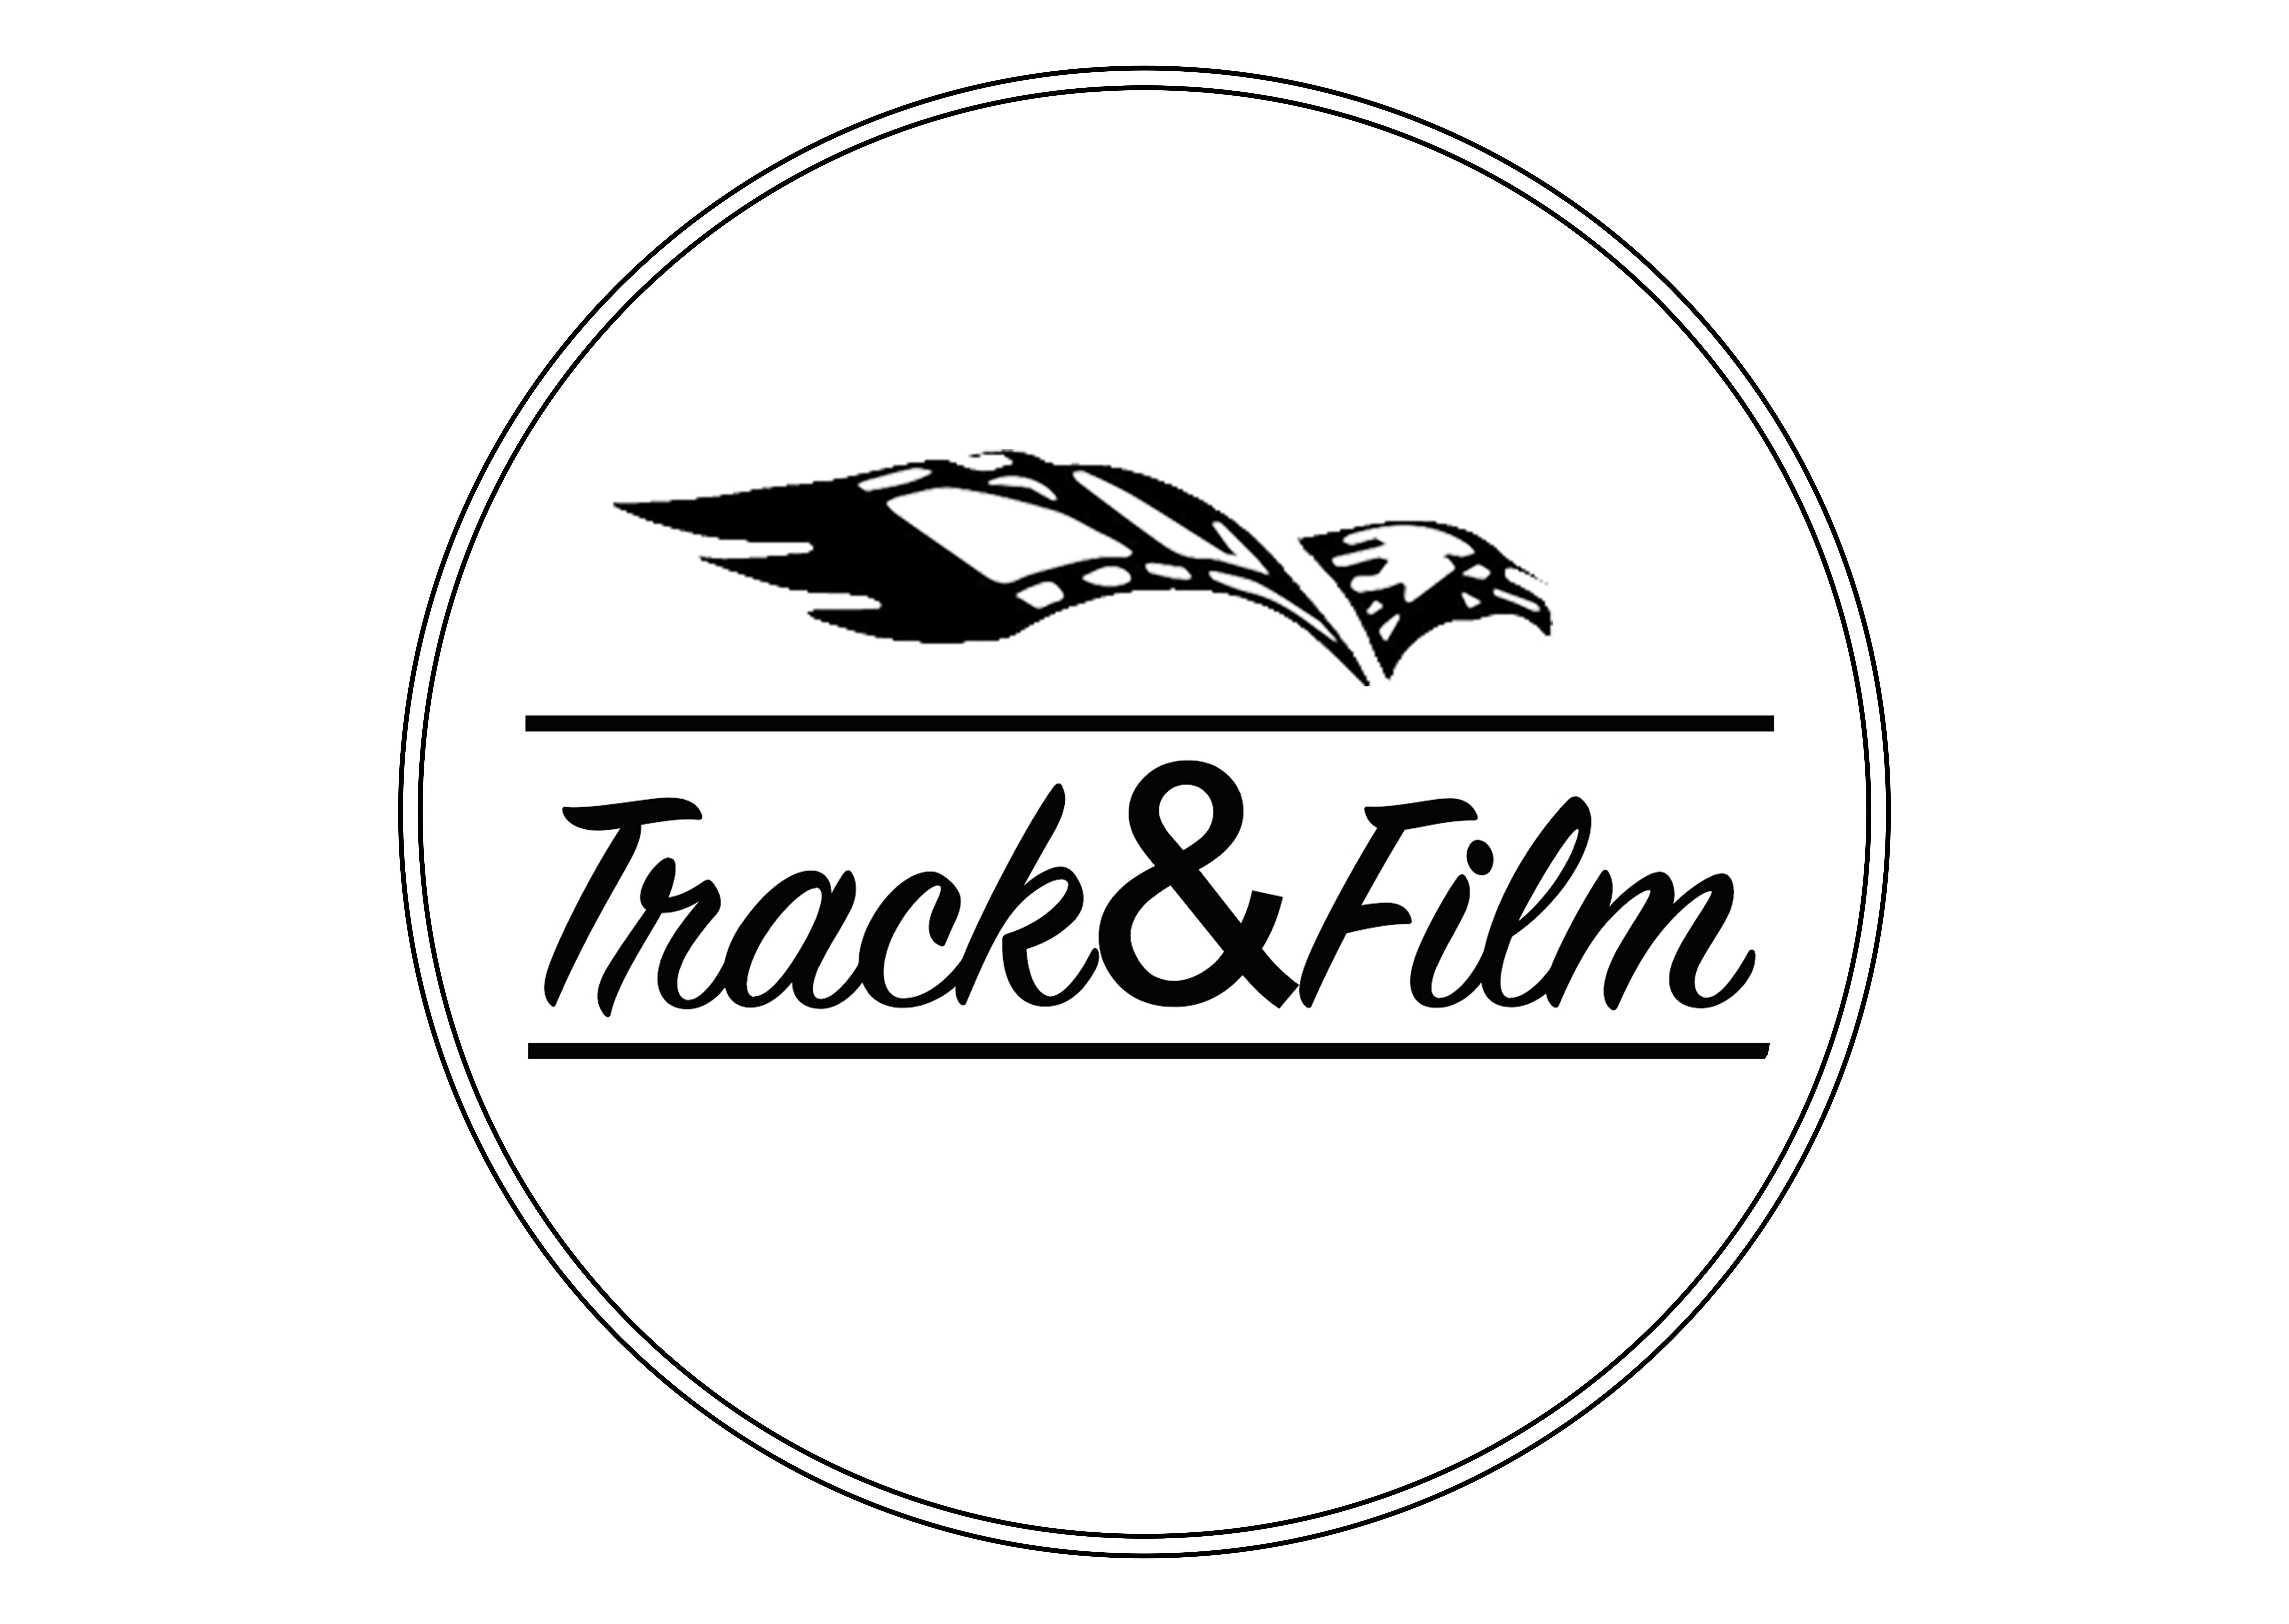 Track and Film